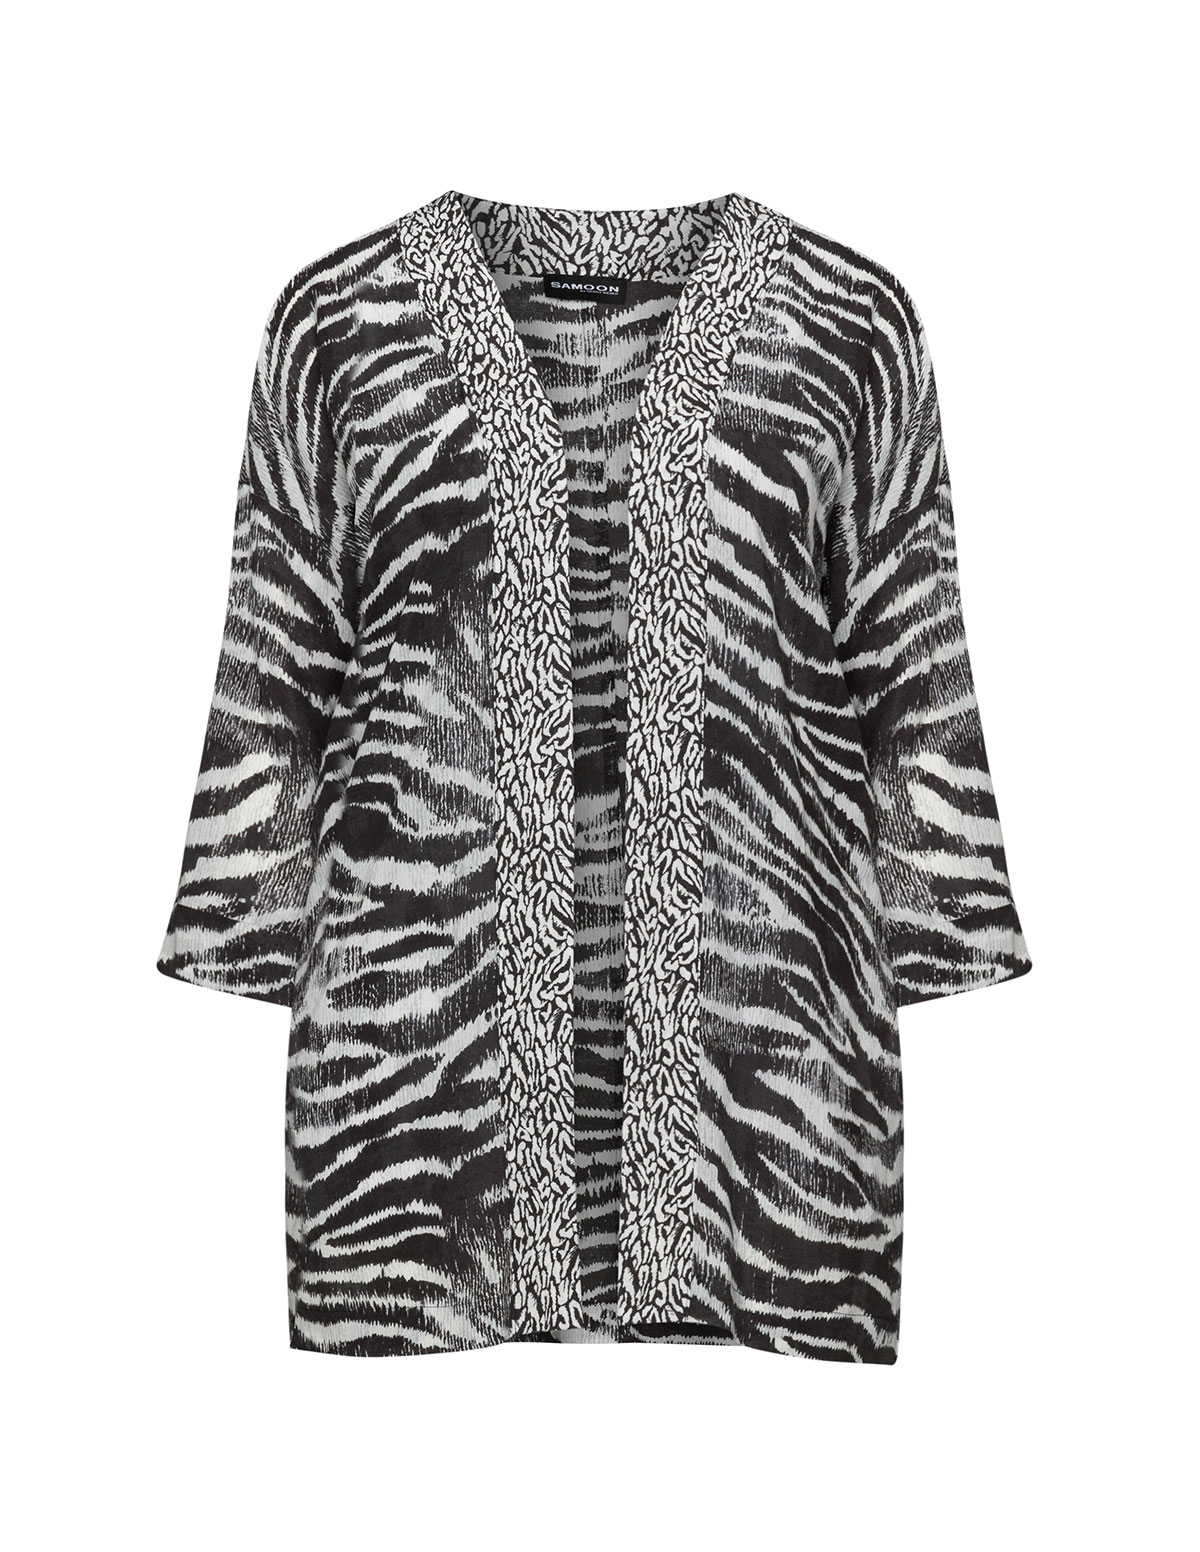 Animal print open front jacket by
SAMOON